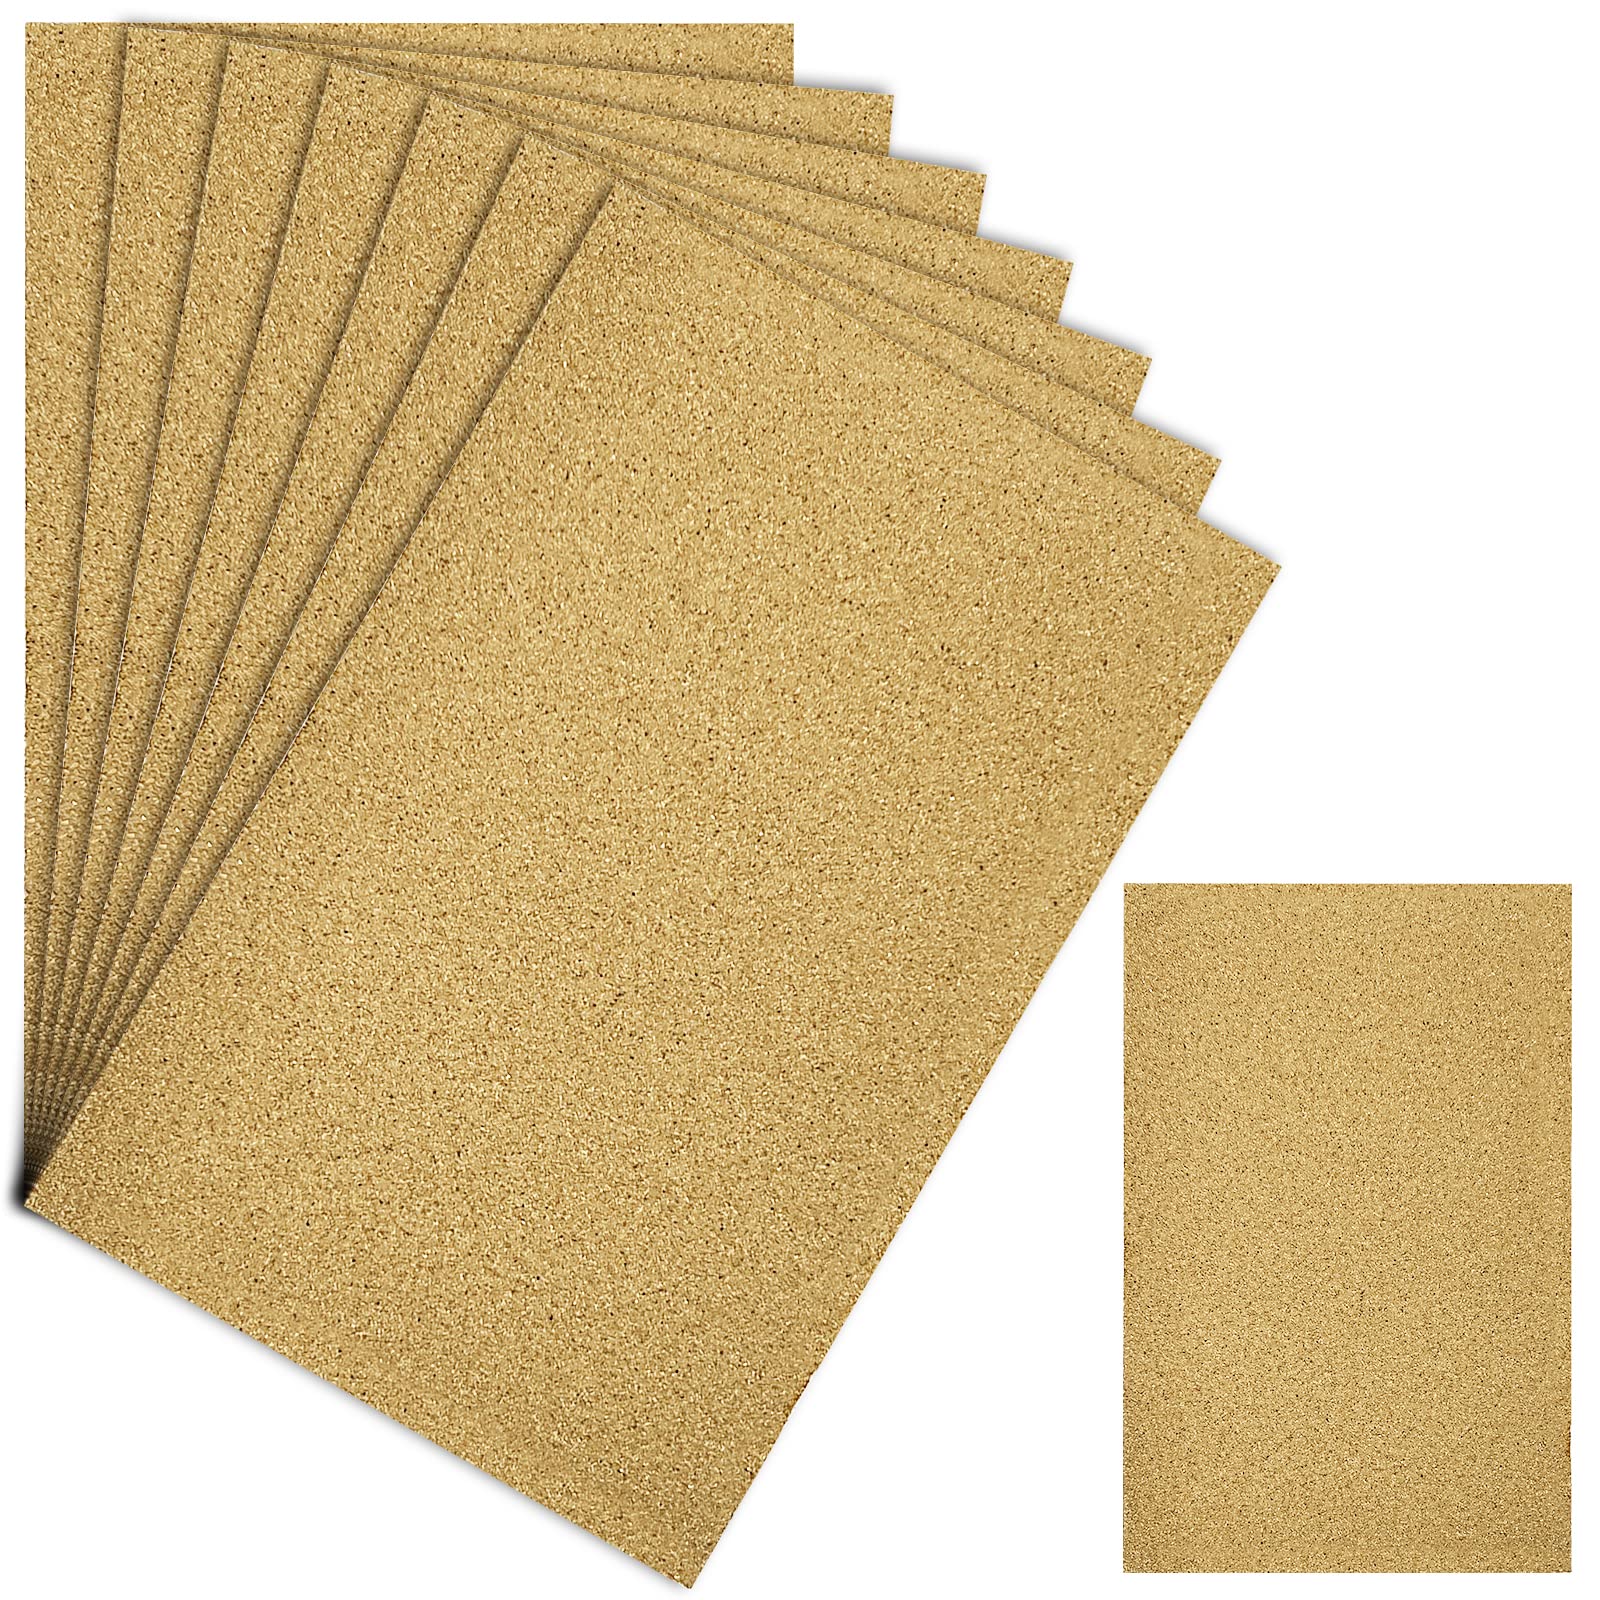 S&X s&x gravel paper for bird cage 10-pack 11 x 17 gravel liner paper sand  sheets bird cage liners